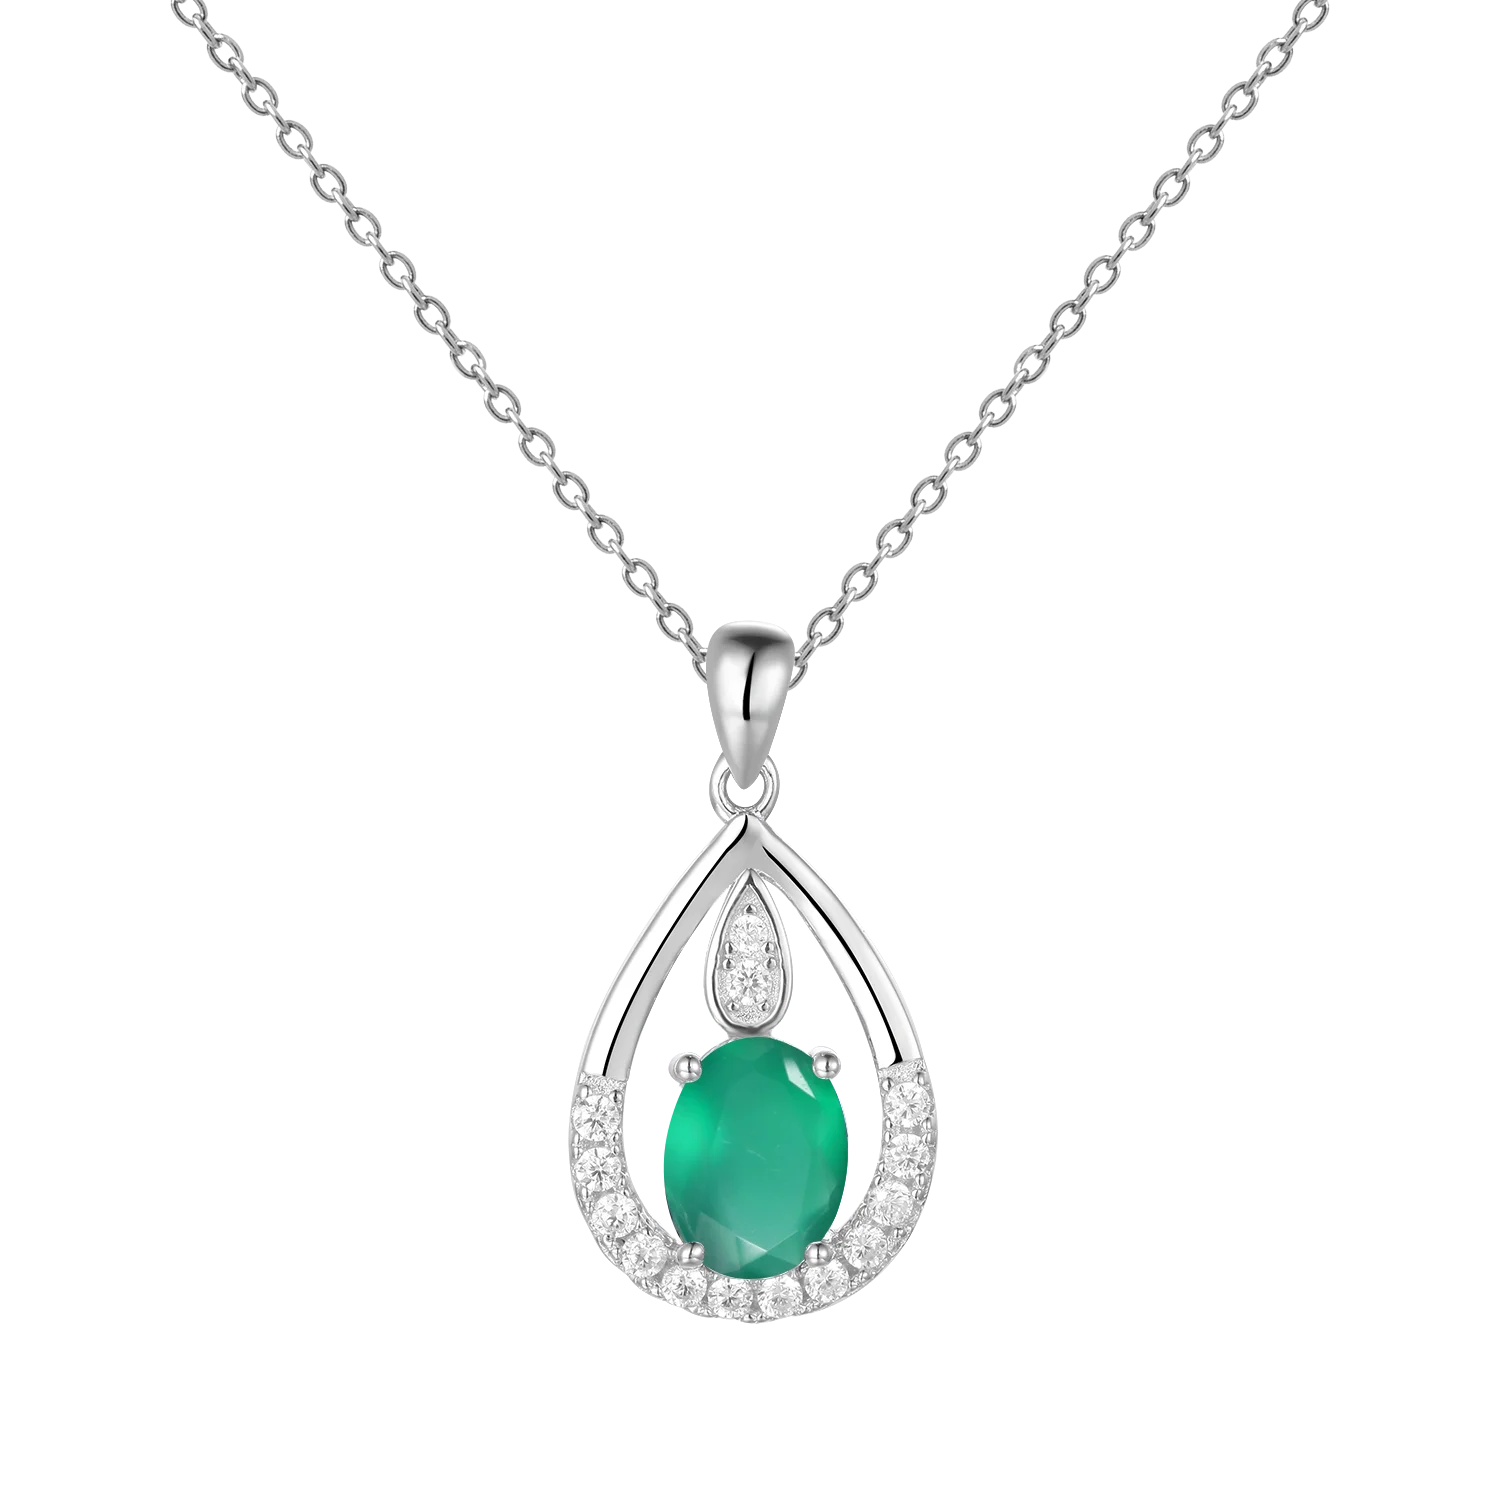 Gem's Ballet December Birthstone Topaz Necklace 6x8mm Oval Pink Topaz Pendant Necklace in 925 Sterling Silver with 18" Chain Green Agate